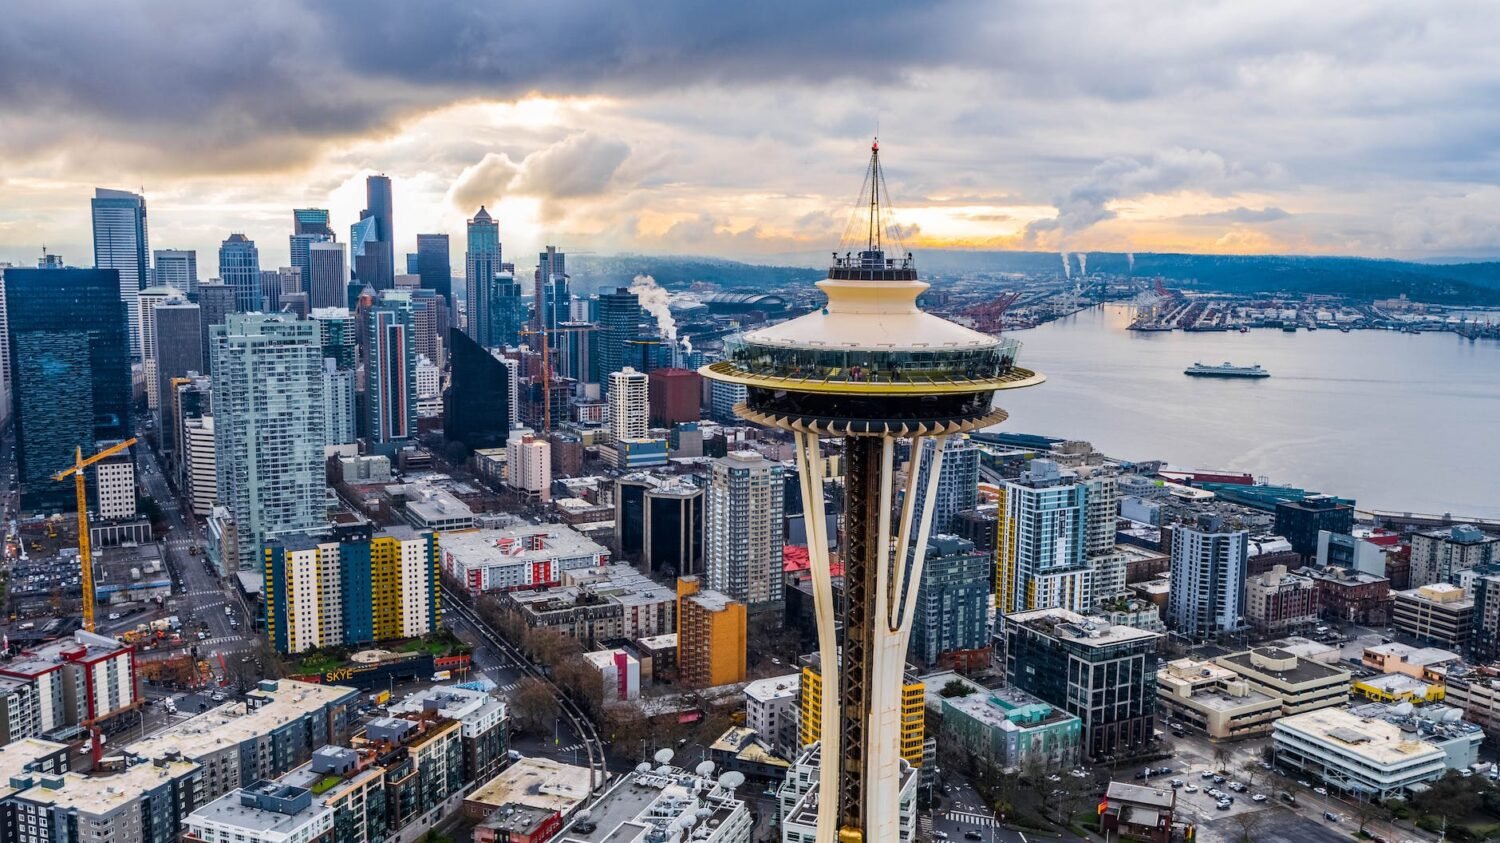 10 Best Top Rated Backpacker Hostels In Seattle For 2023!